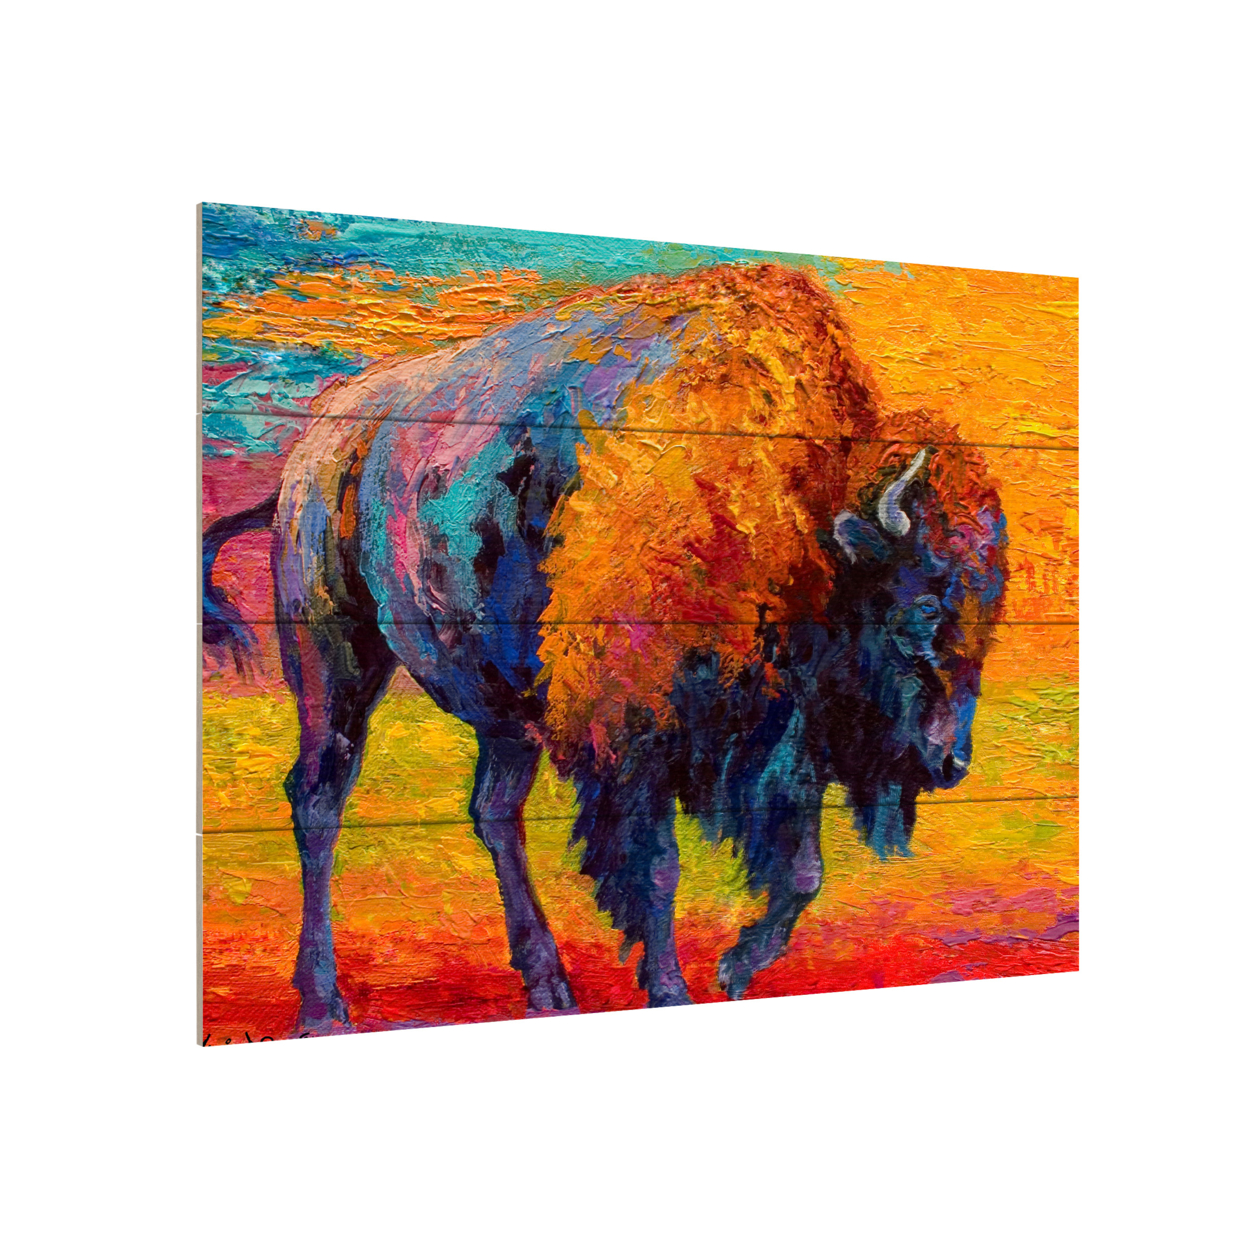 Wall Art 12 X 16 Inches Titled Spirit Of The Prairie Ready To Hang Printed On Wooden Planks